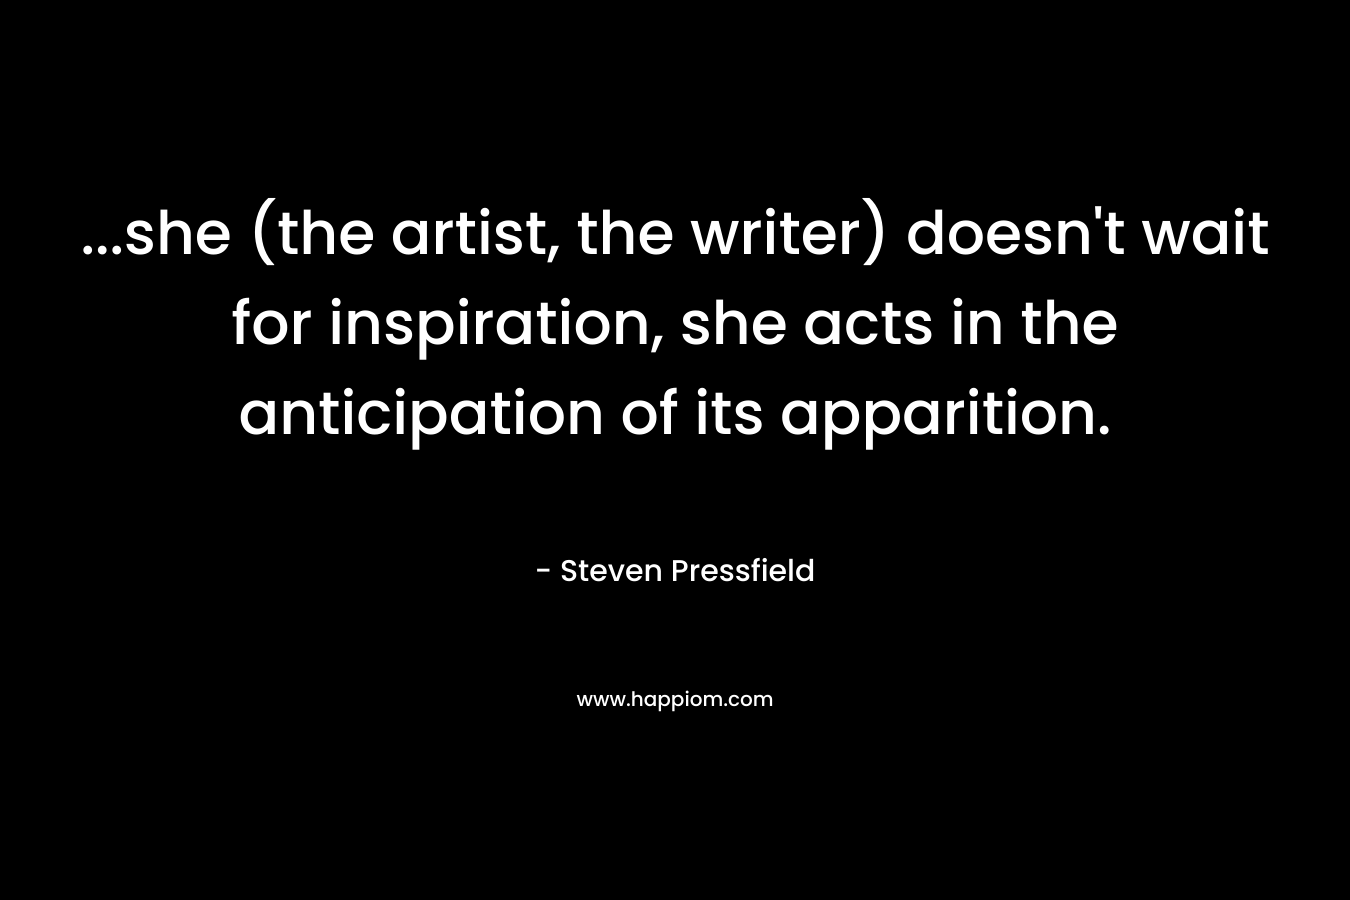 …she (the artist, the writer) doesn’t wait for inspiration, she acts in the anticipation of its apparition. – Steven Pressfield